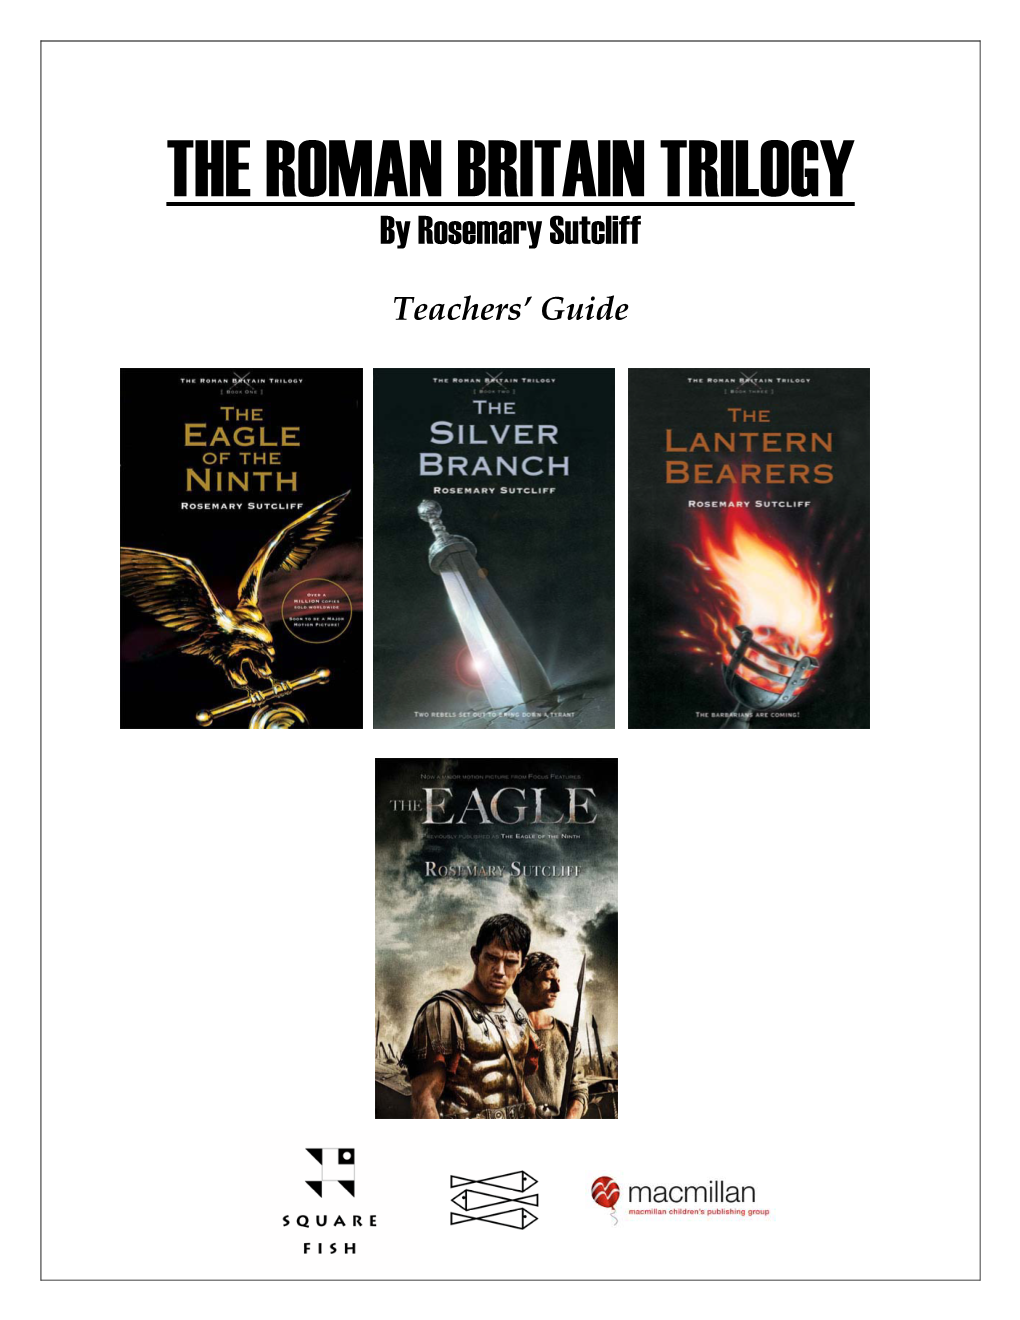 THE ROMAN BRITAIN TRILOGY by Rosemary Sutcliff